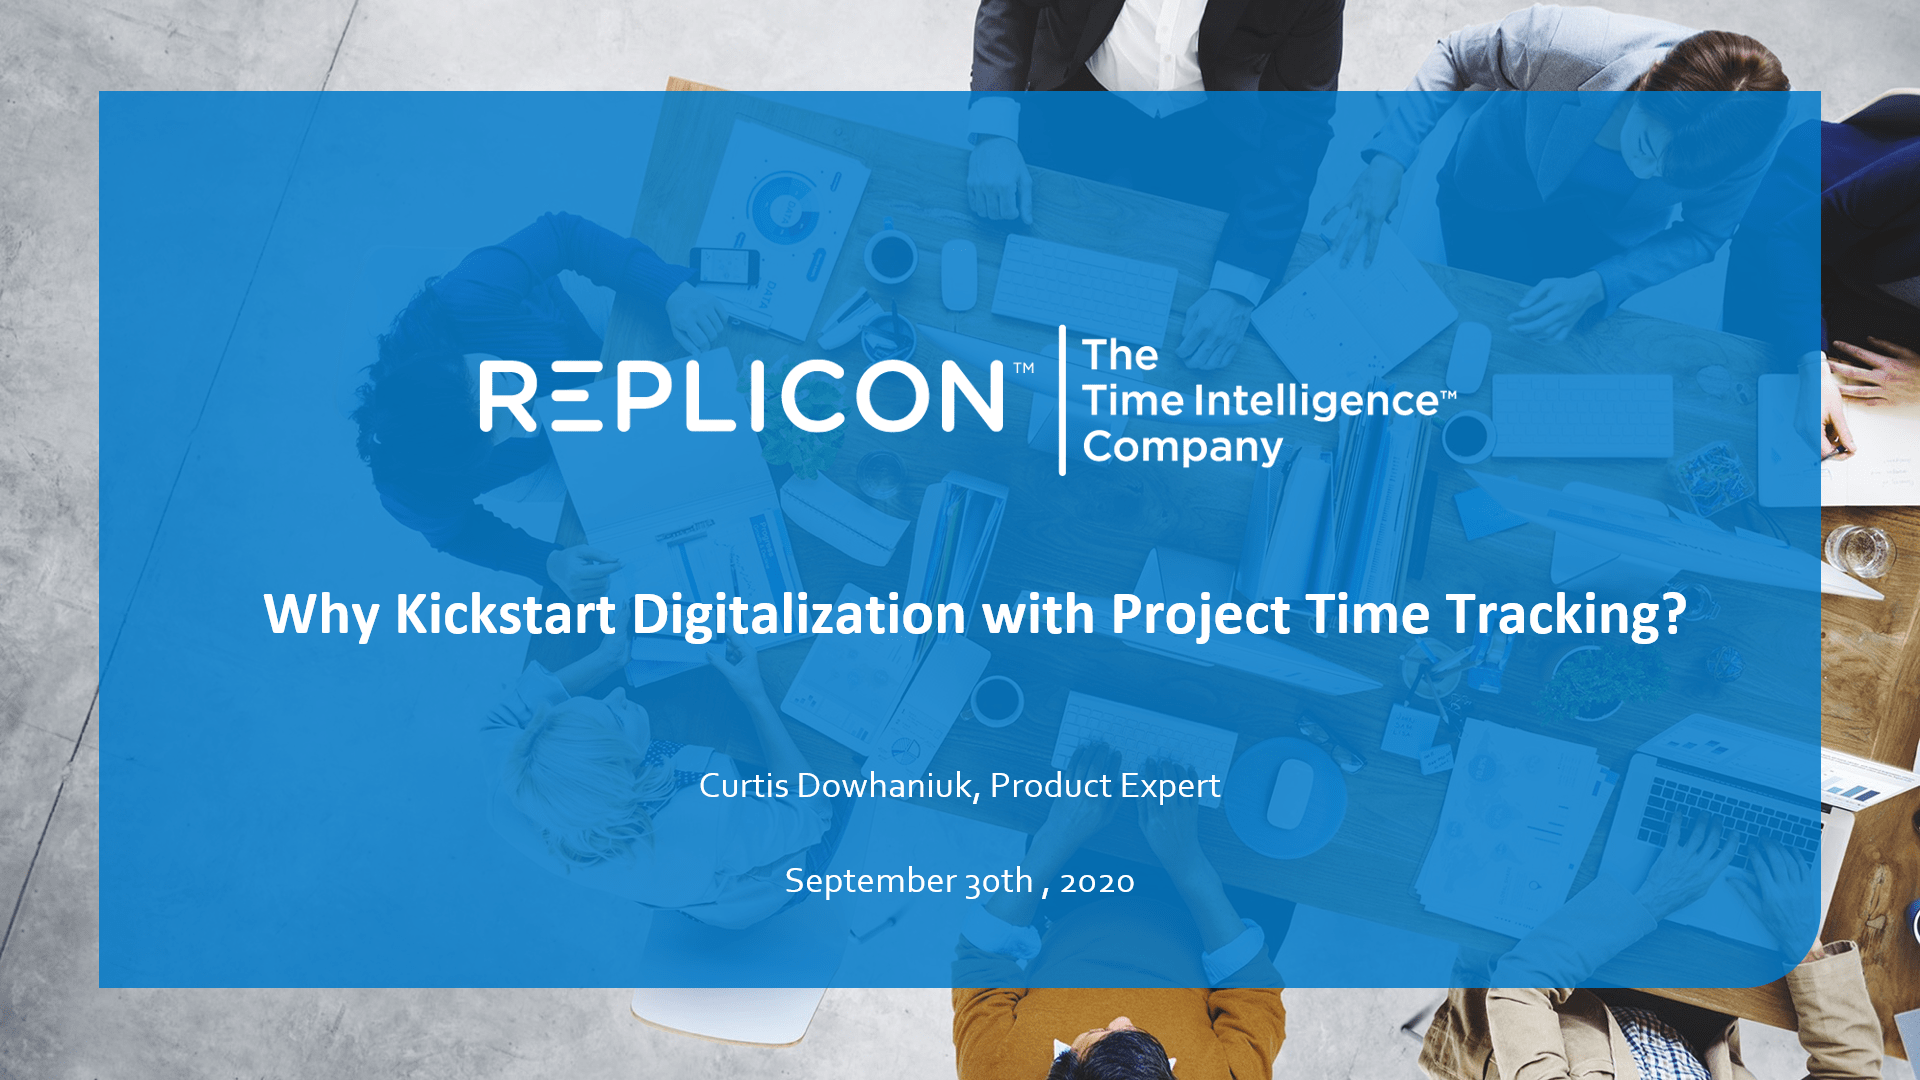 Why Kickstart Digitalization with Project Time Tracking?